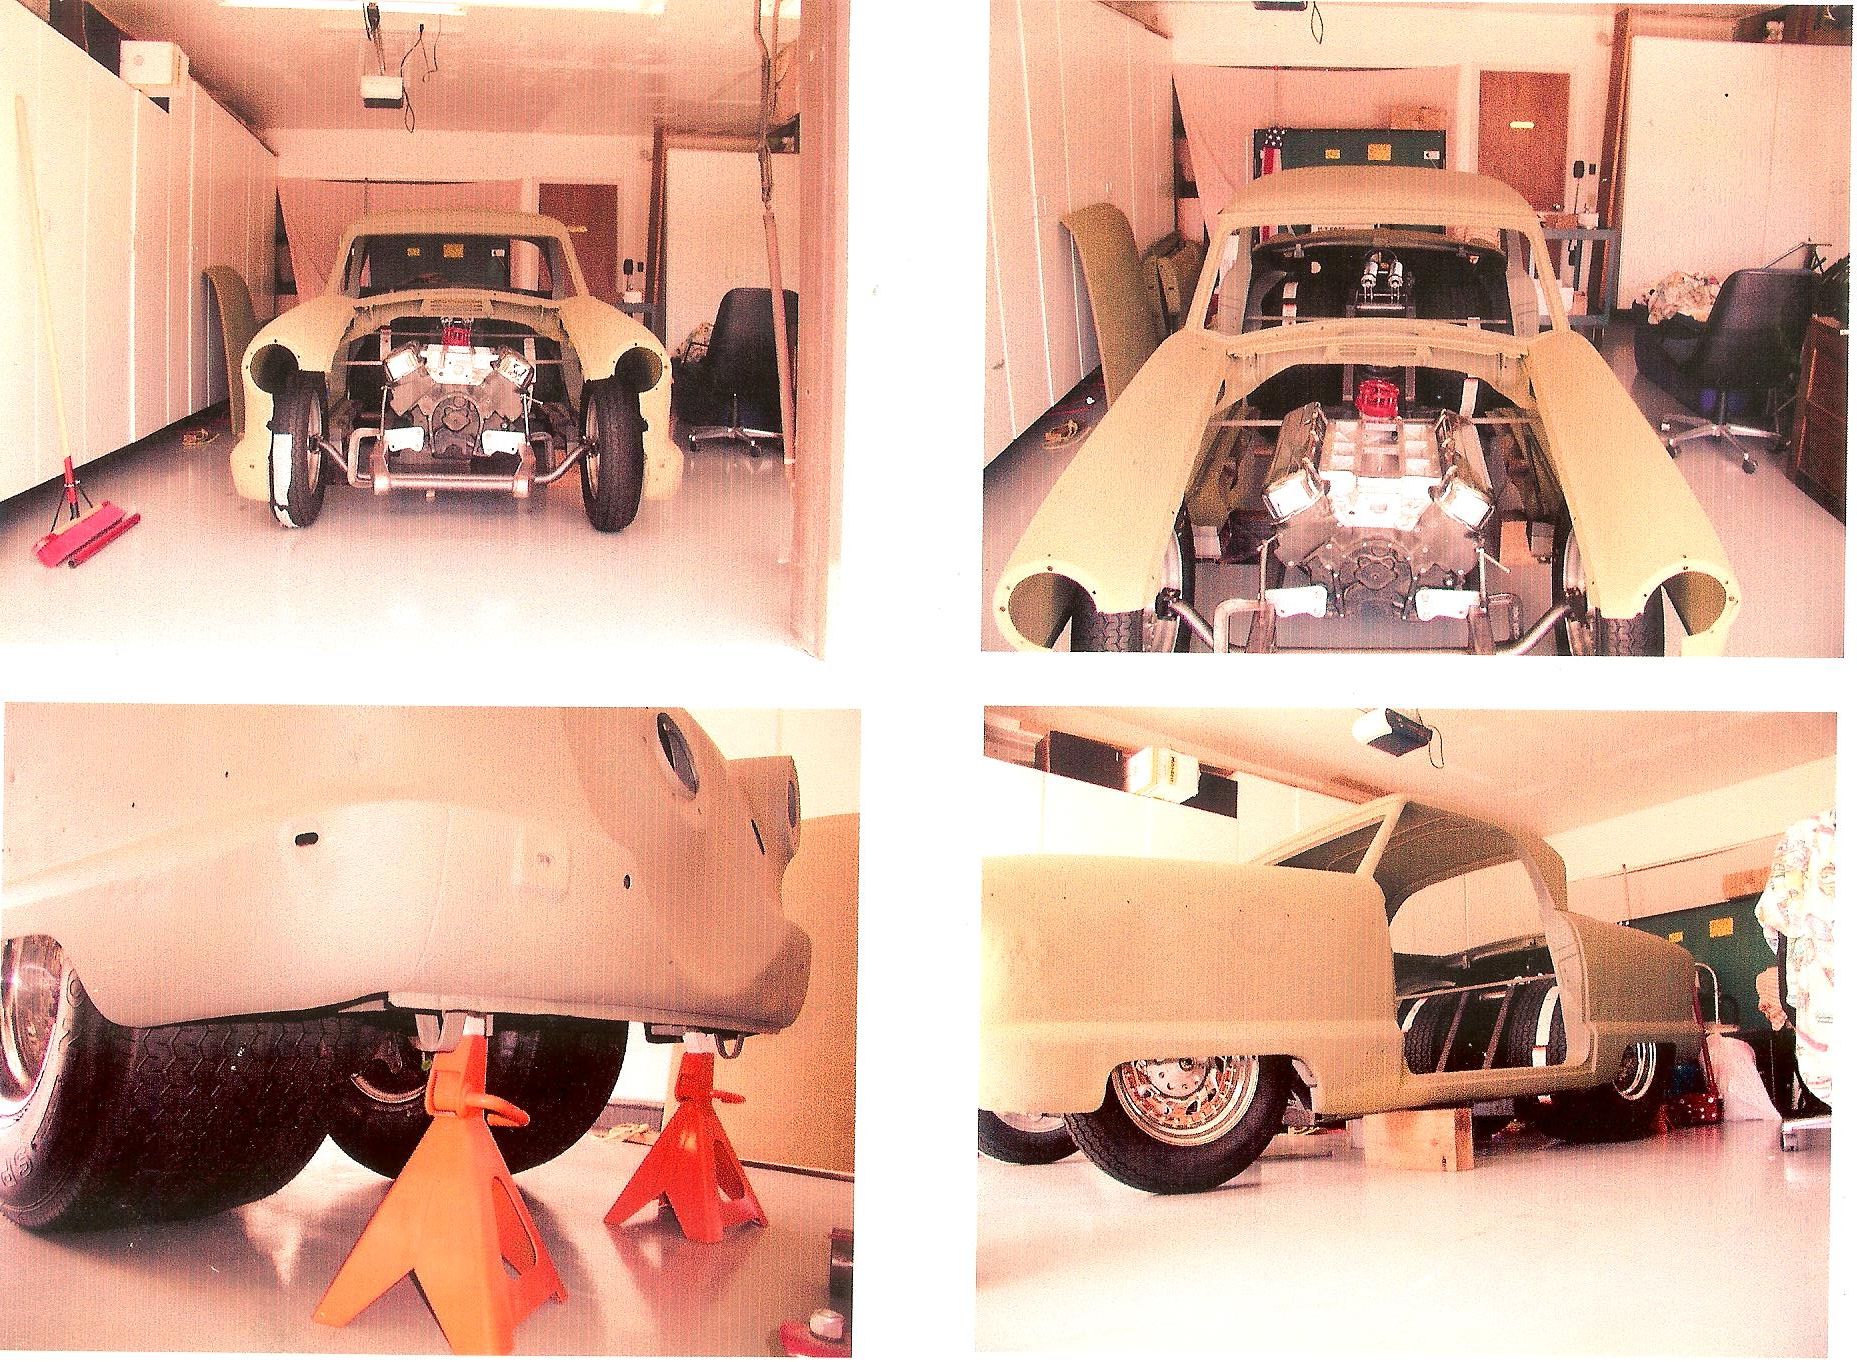 Four Images of the Car